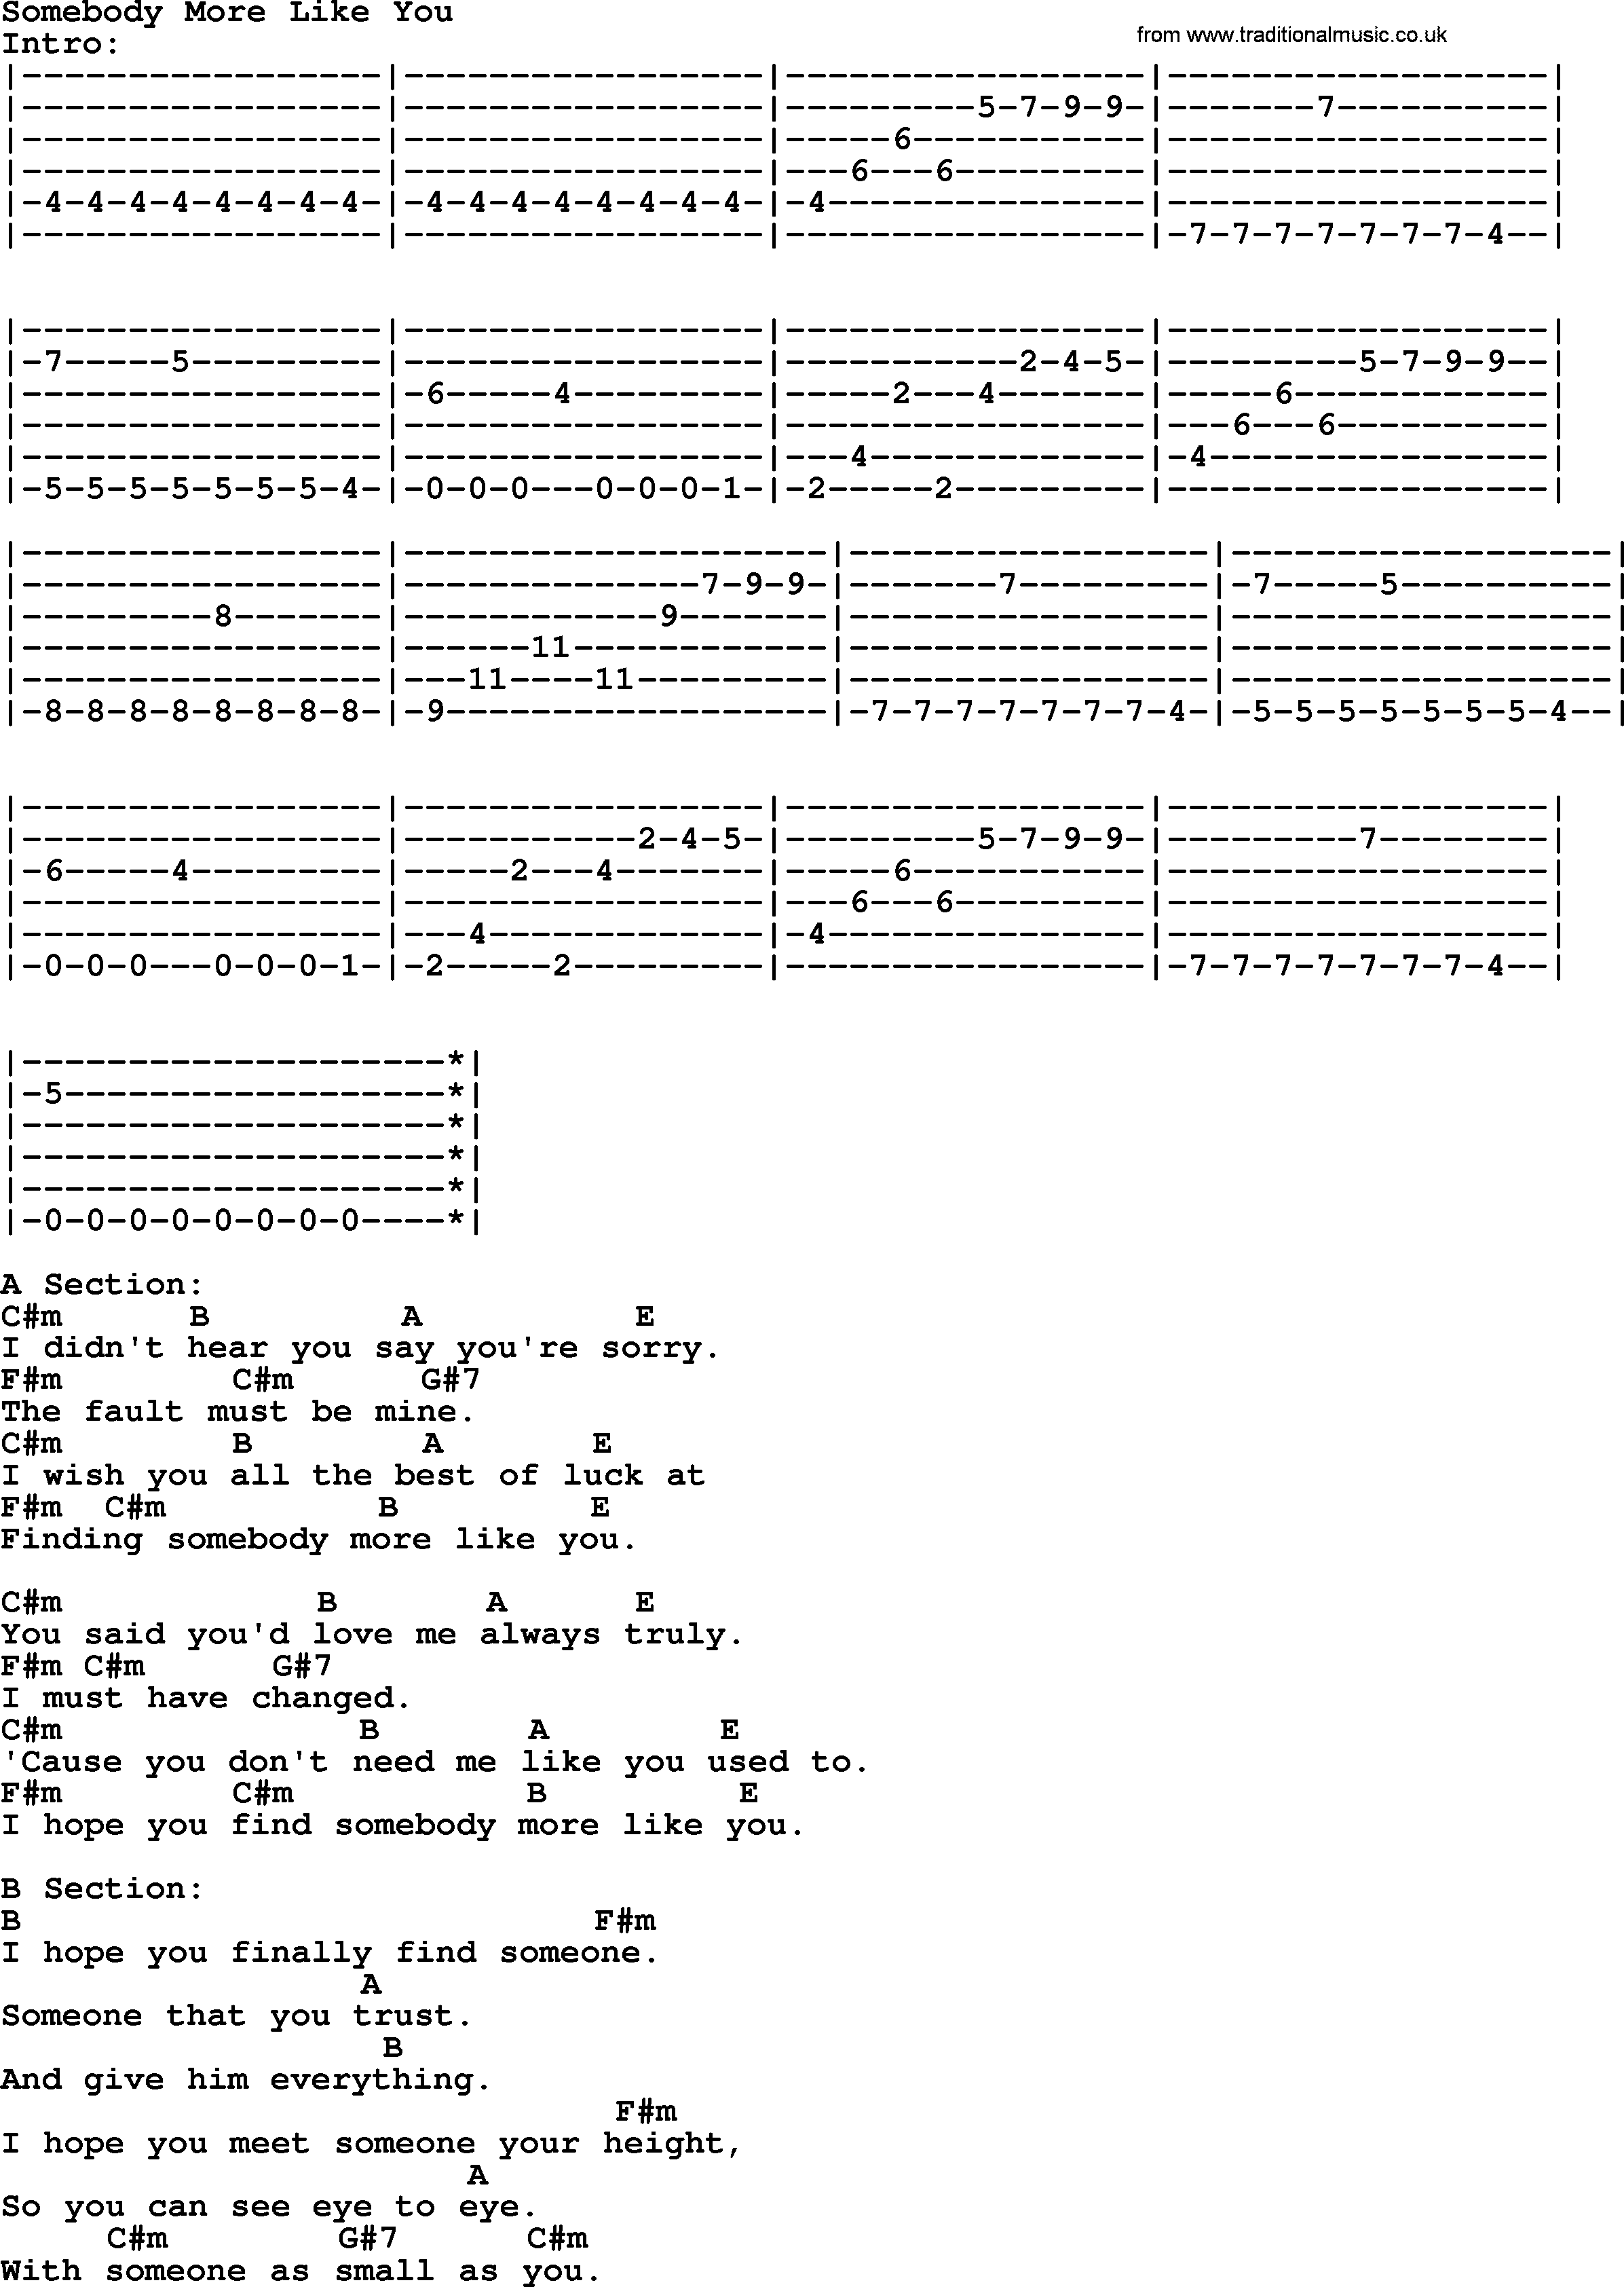 Bluegrass song: Somebody More Like You, lyrics and chords